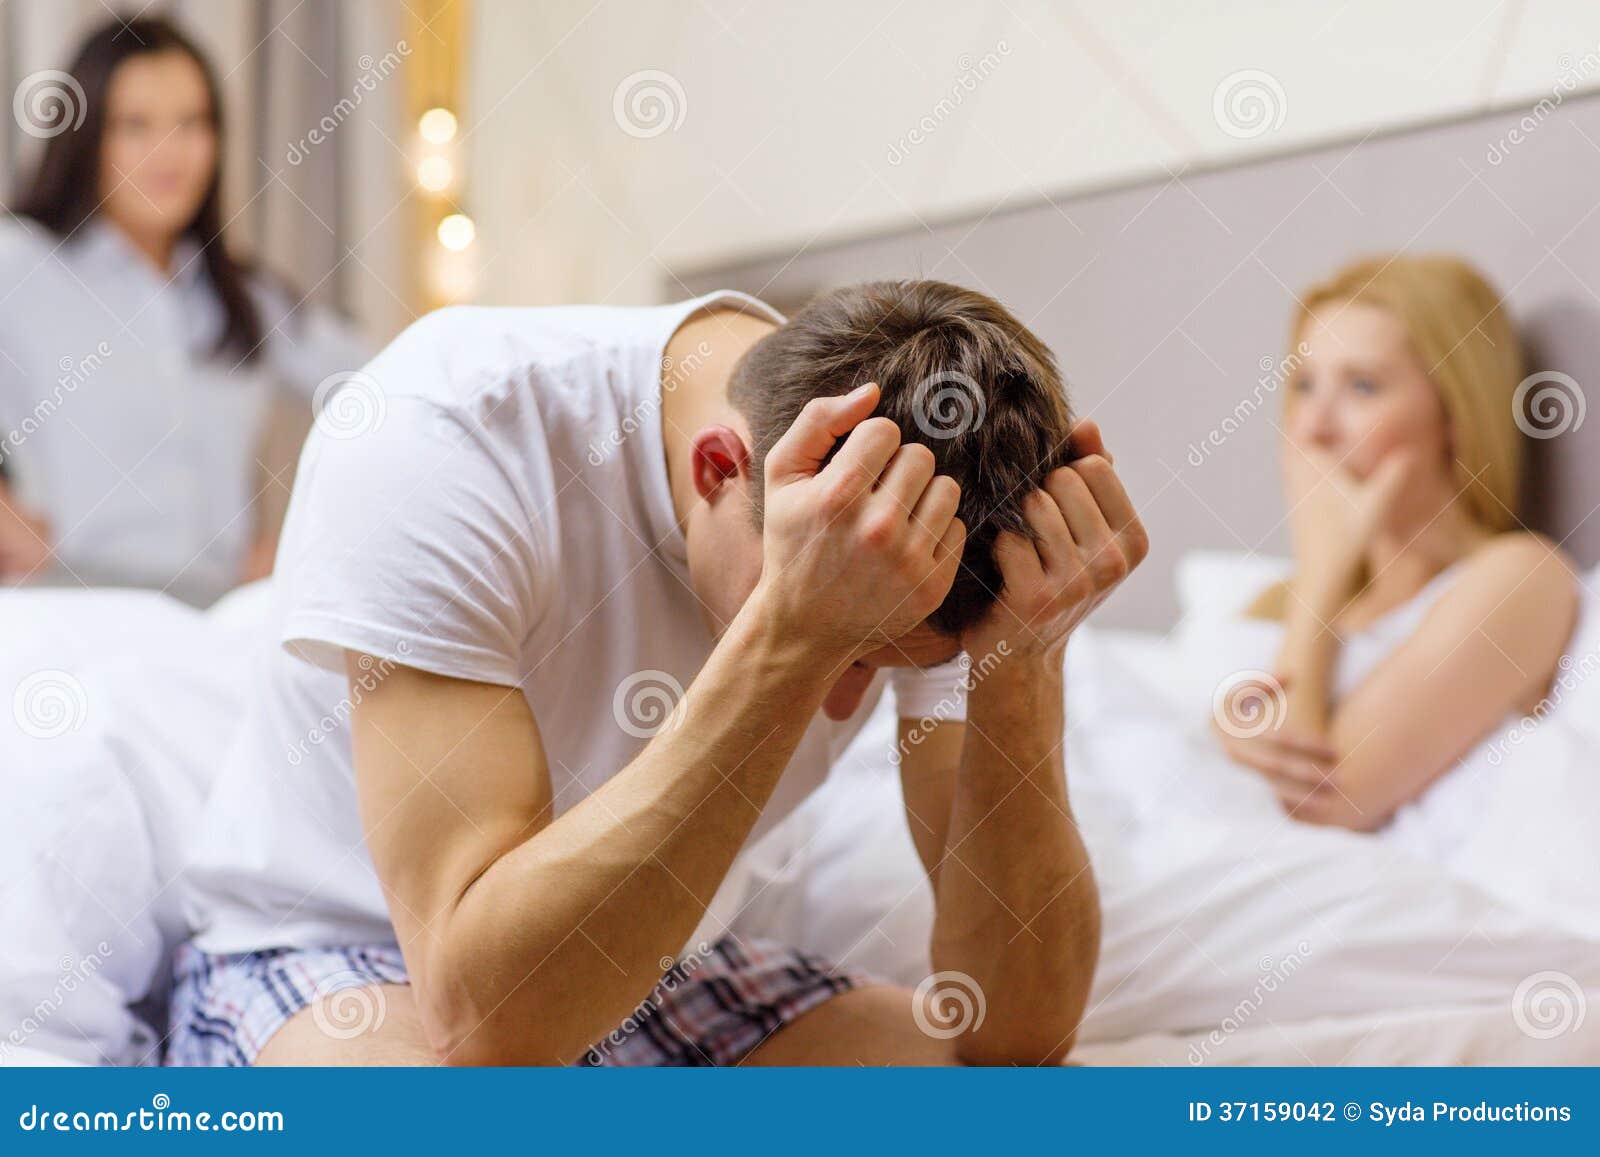 Man Sitting on the Bed with Two Women on the Back Stock Photo